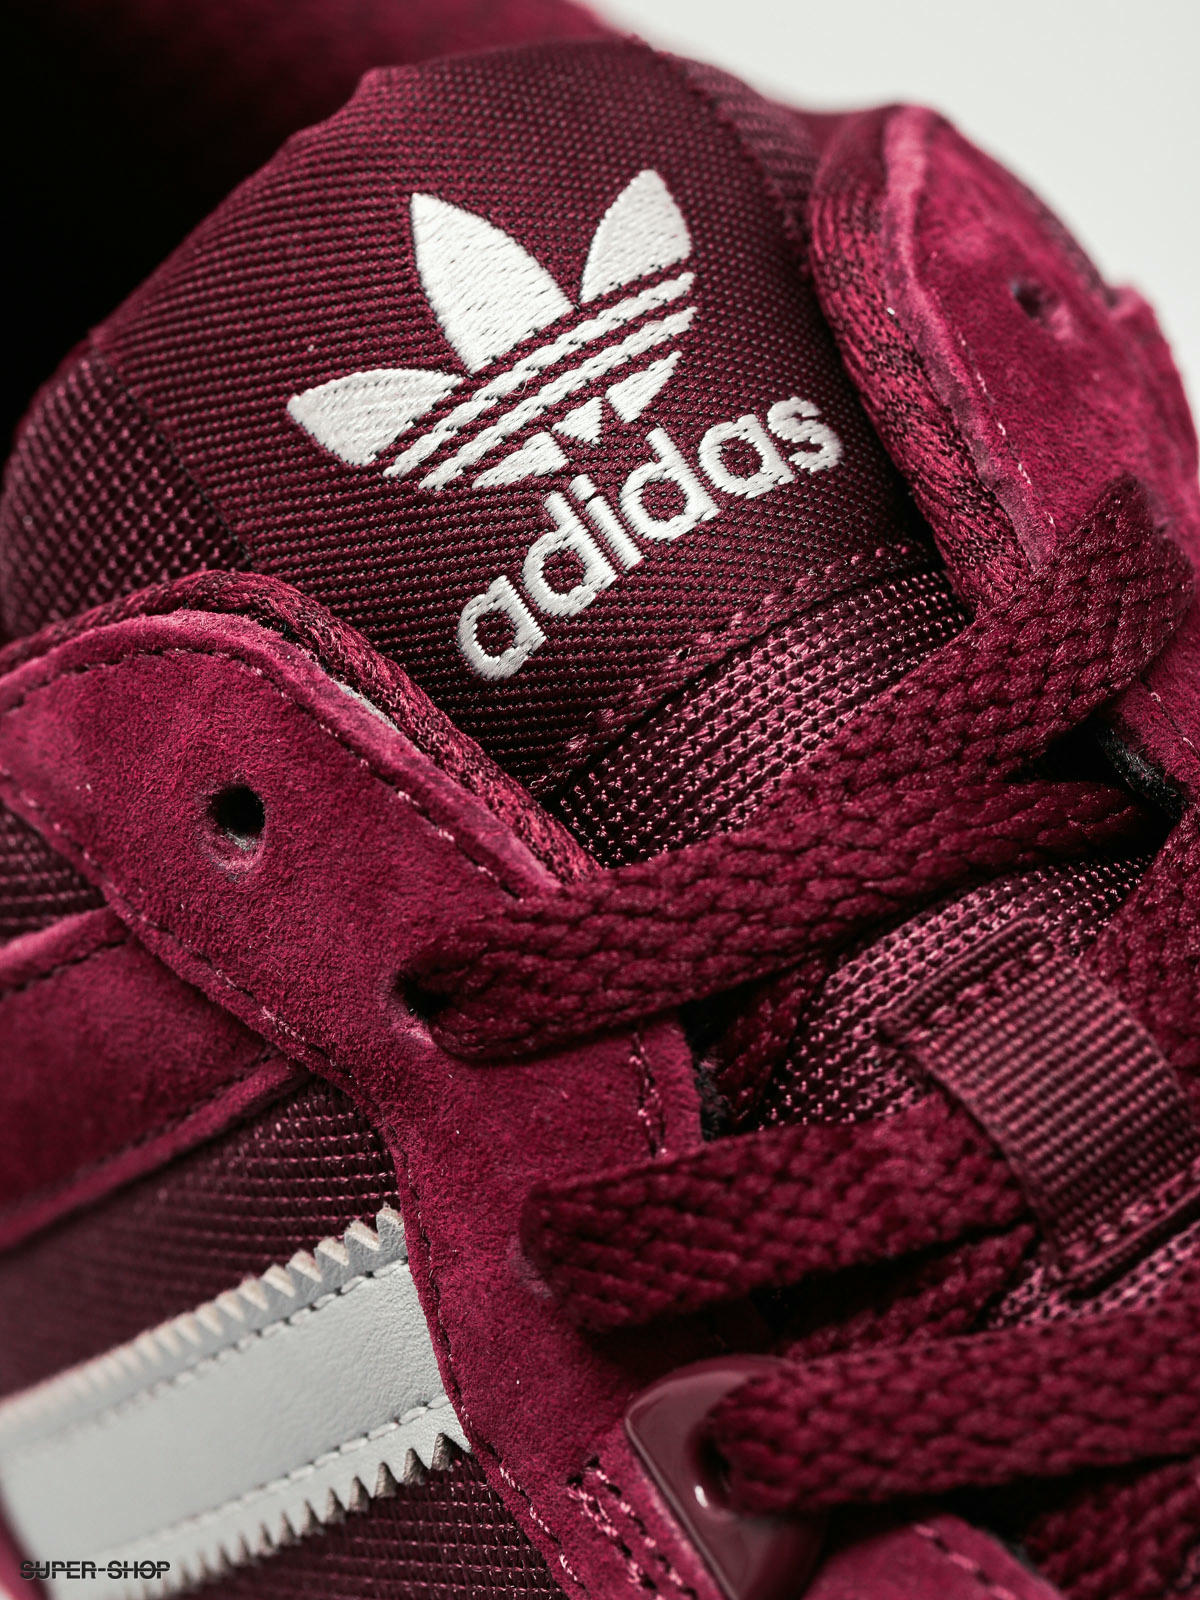 adidas Shoes Zx 700 (maroon/msilve/ftwwht)